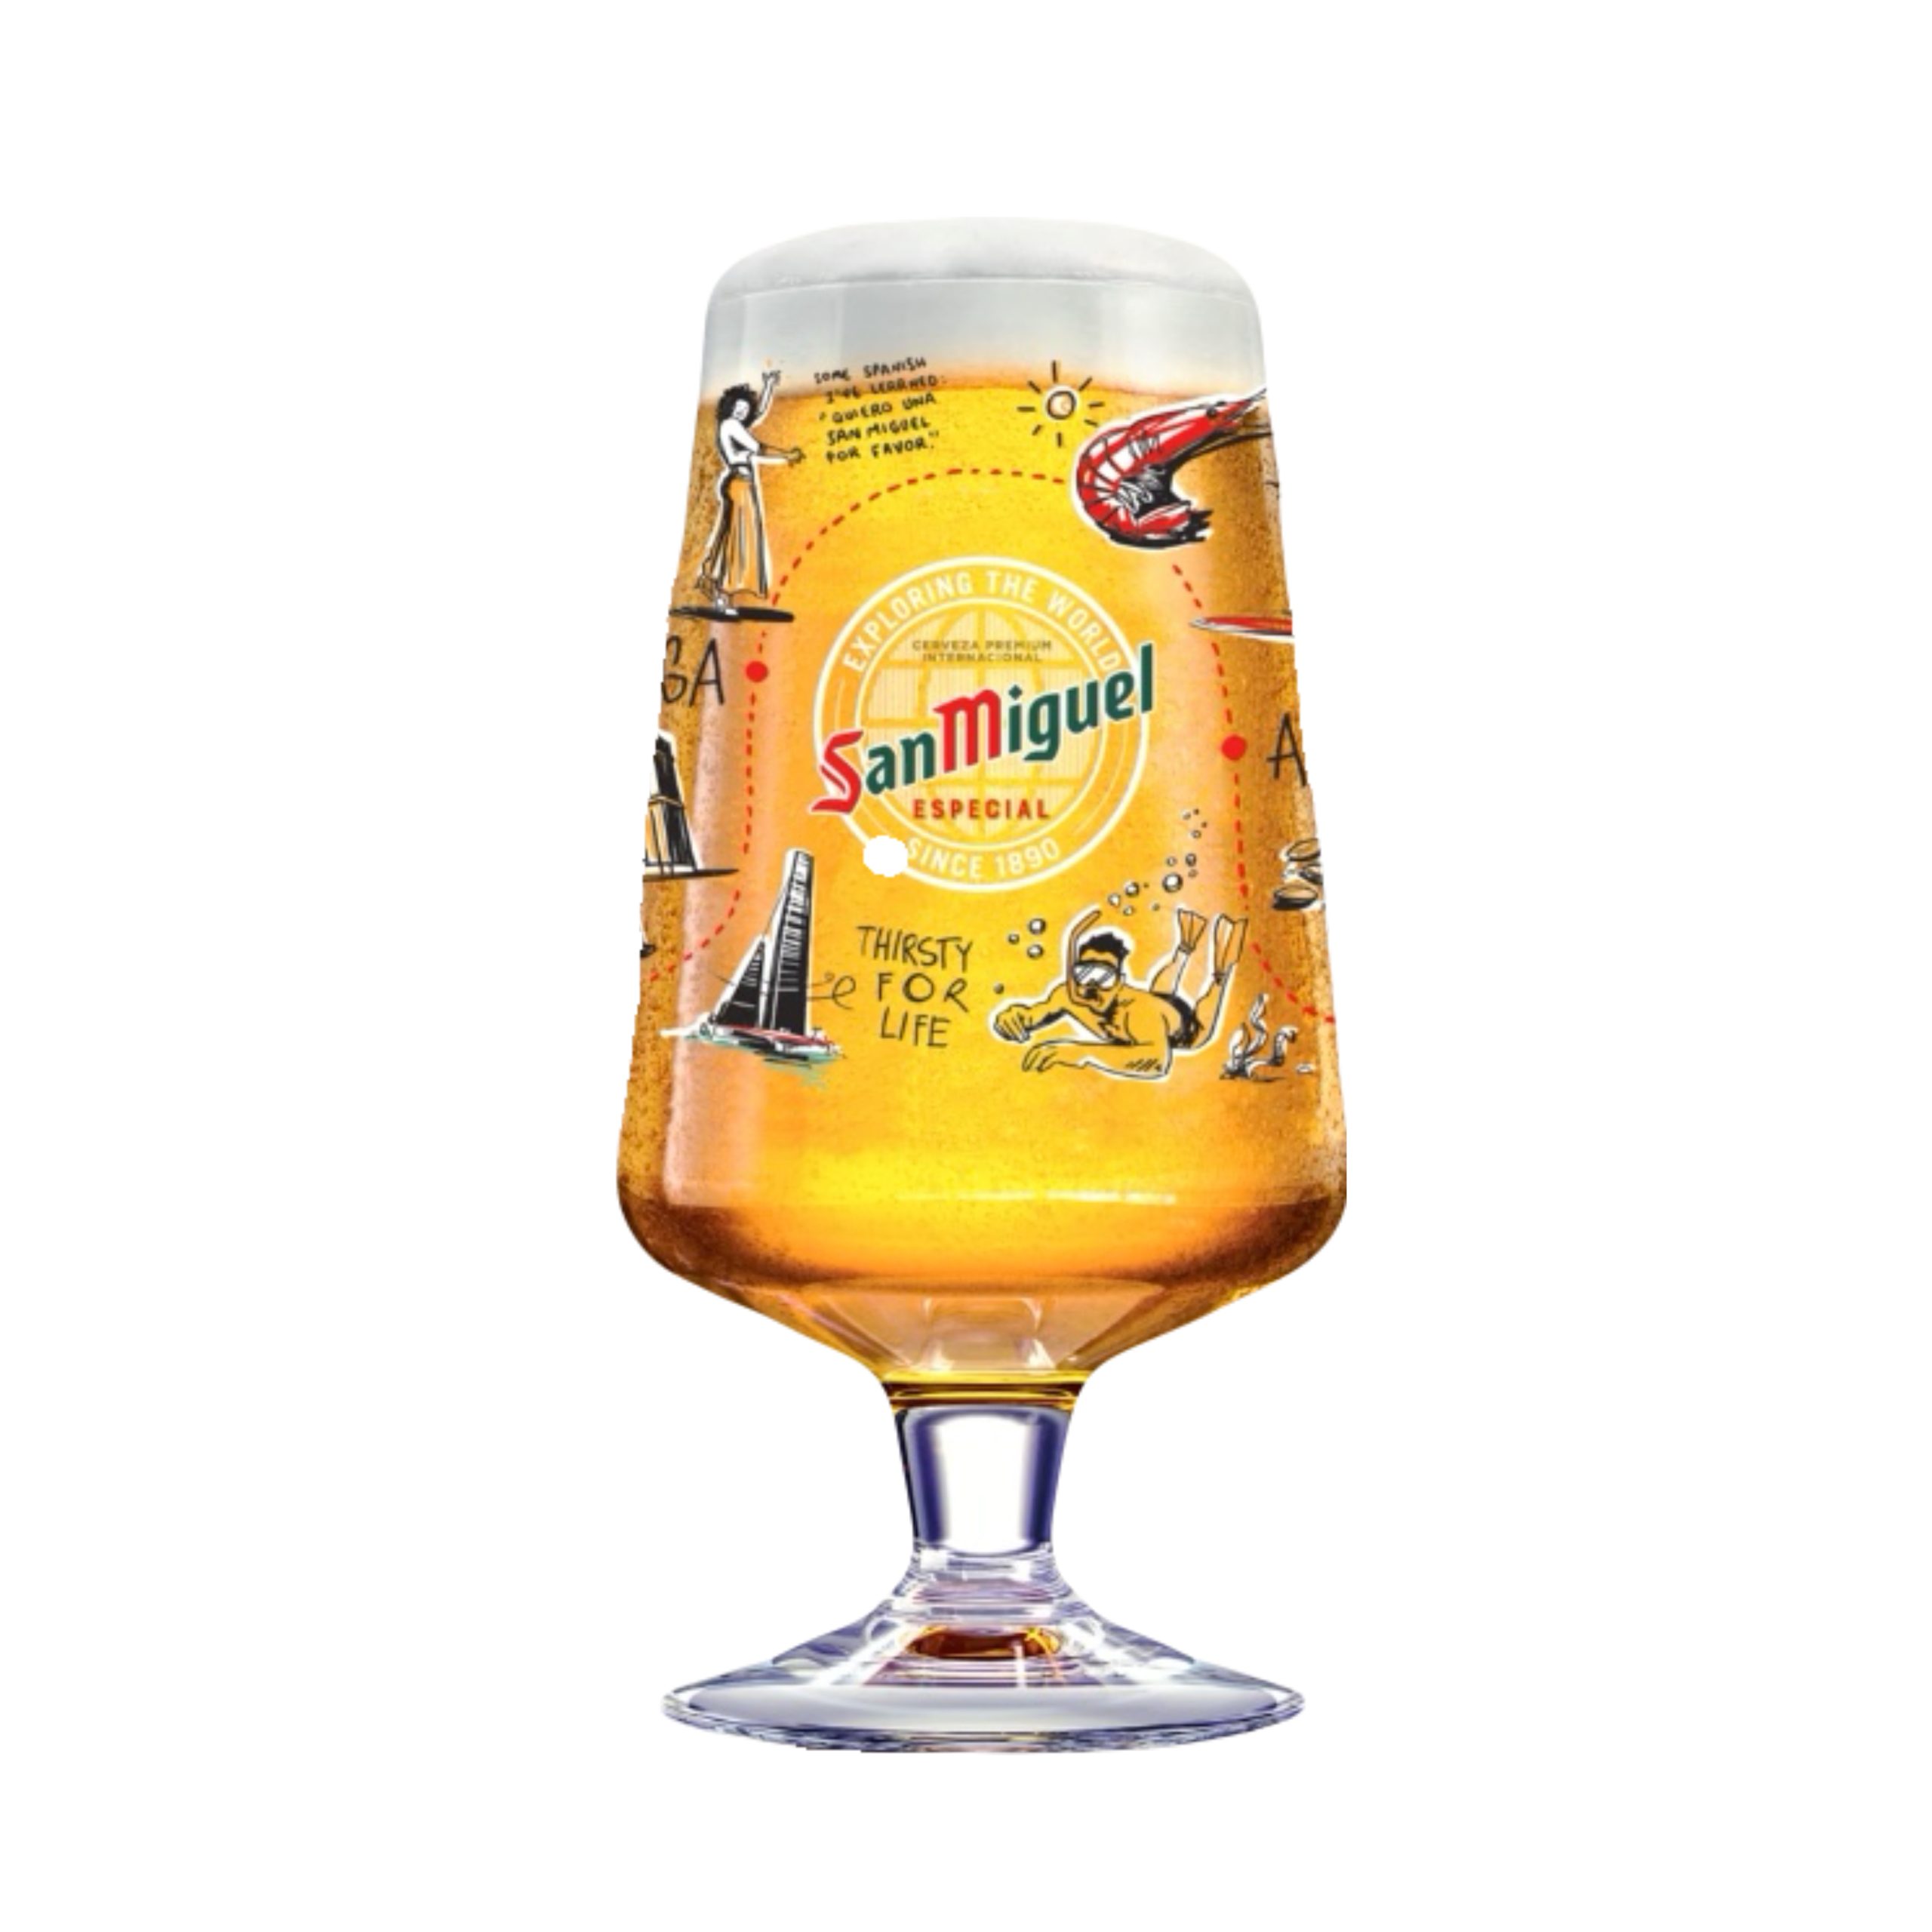 San Miguel Limited Edition Beer Glass